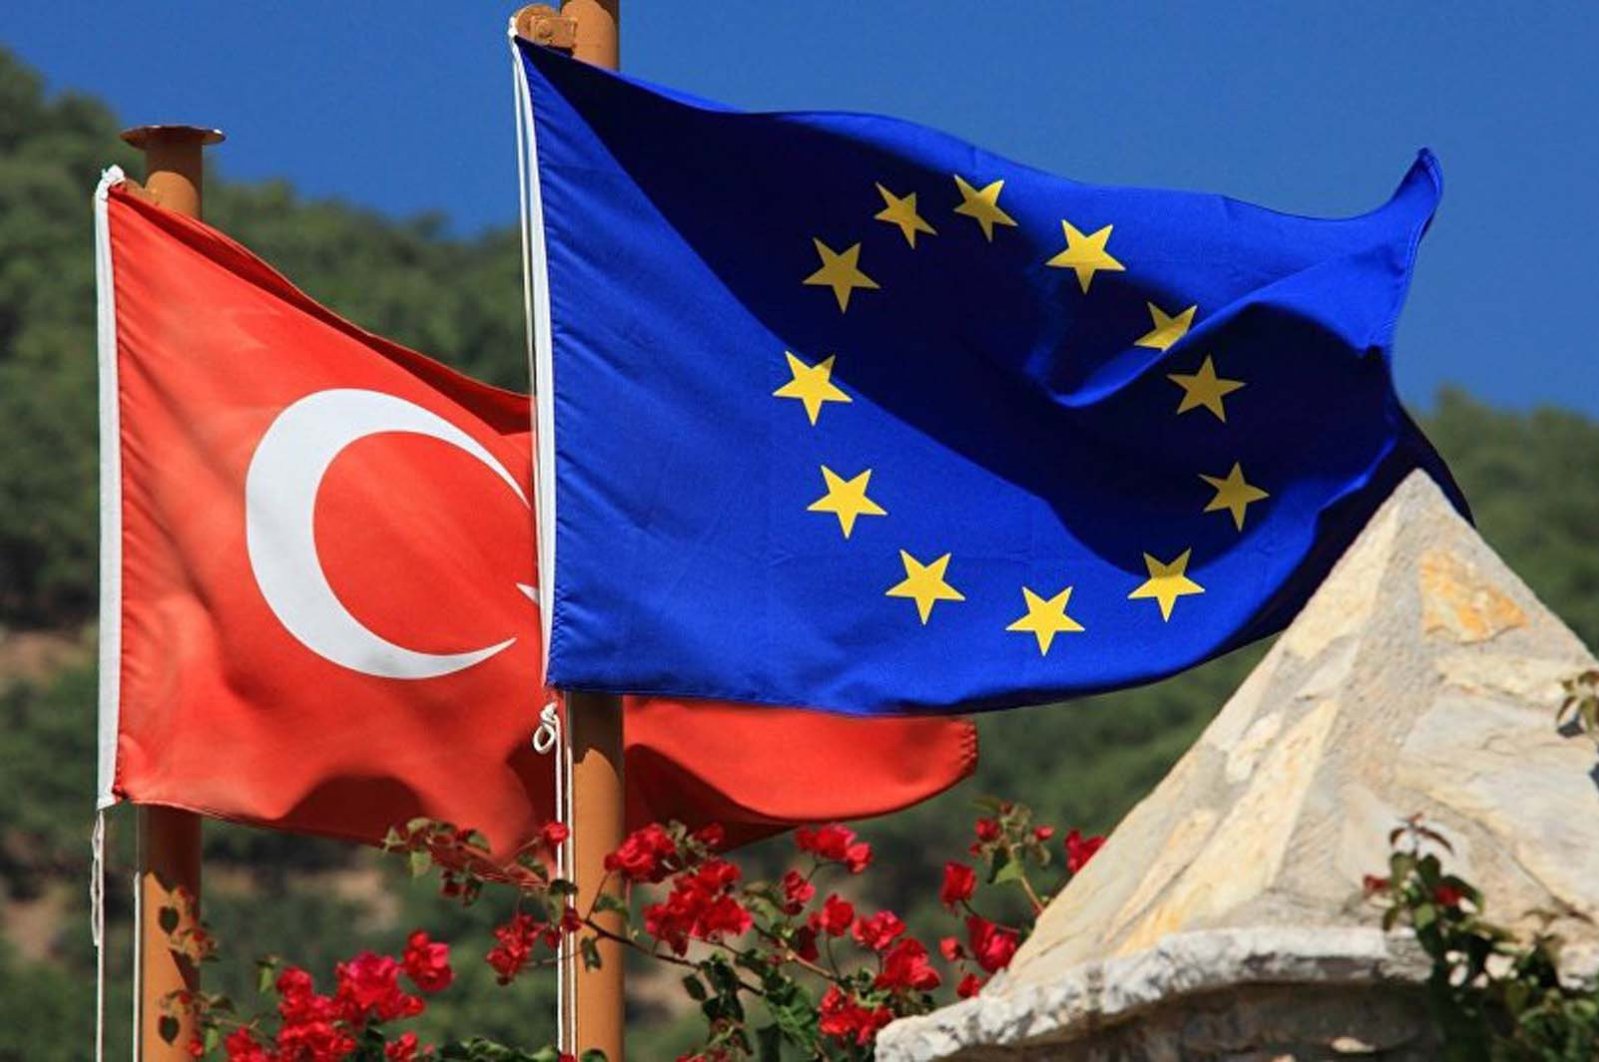 Turkey has been preparing a new initiative to accelerate the accession process to the EU.